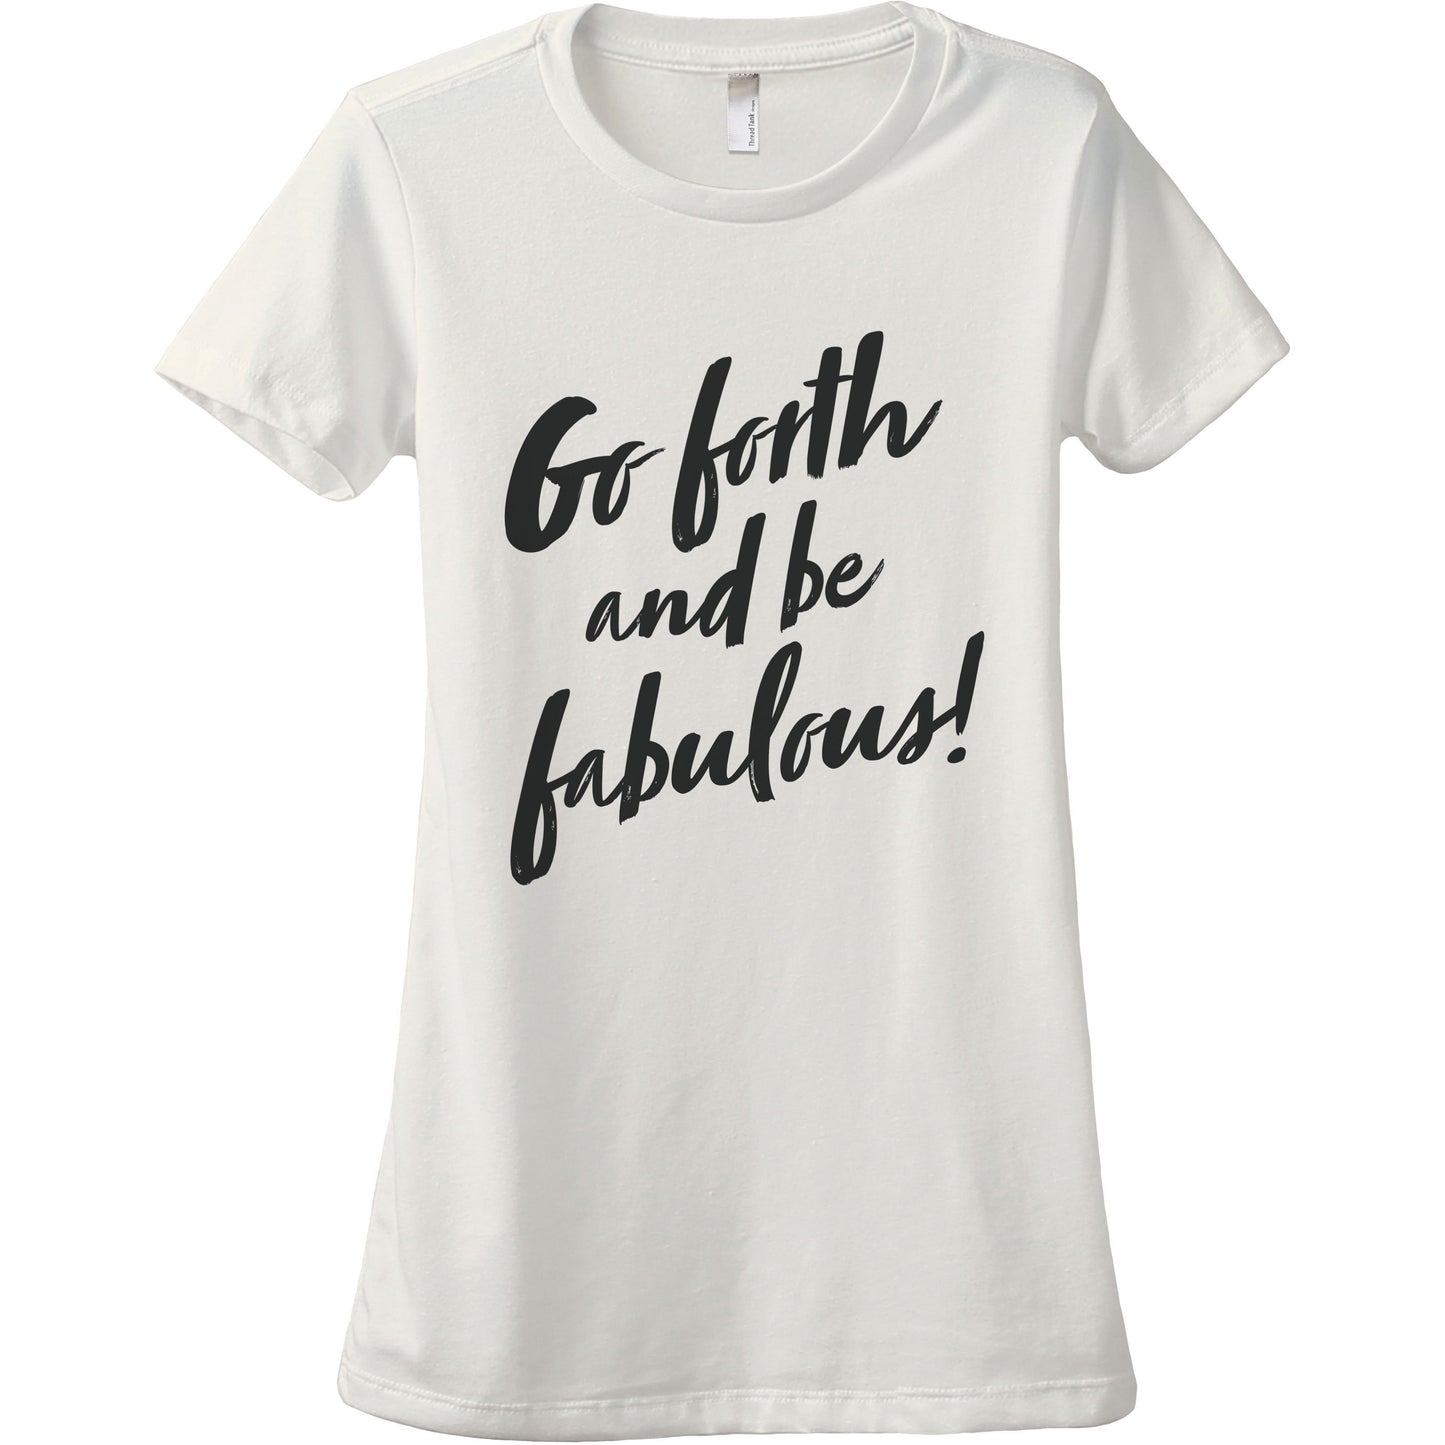 Go Fourth And Be Fabulous - Stories You Can Wear by Thread Tank